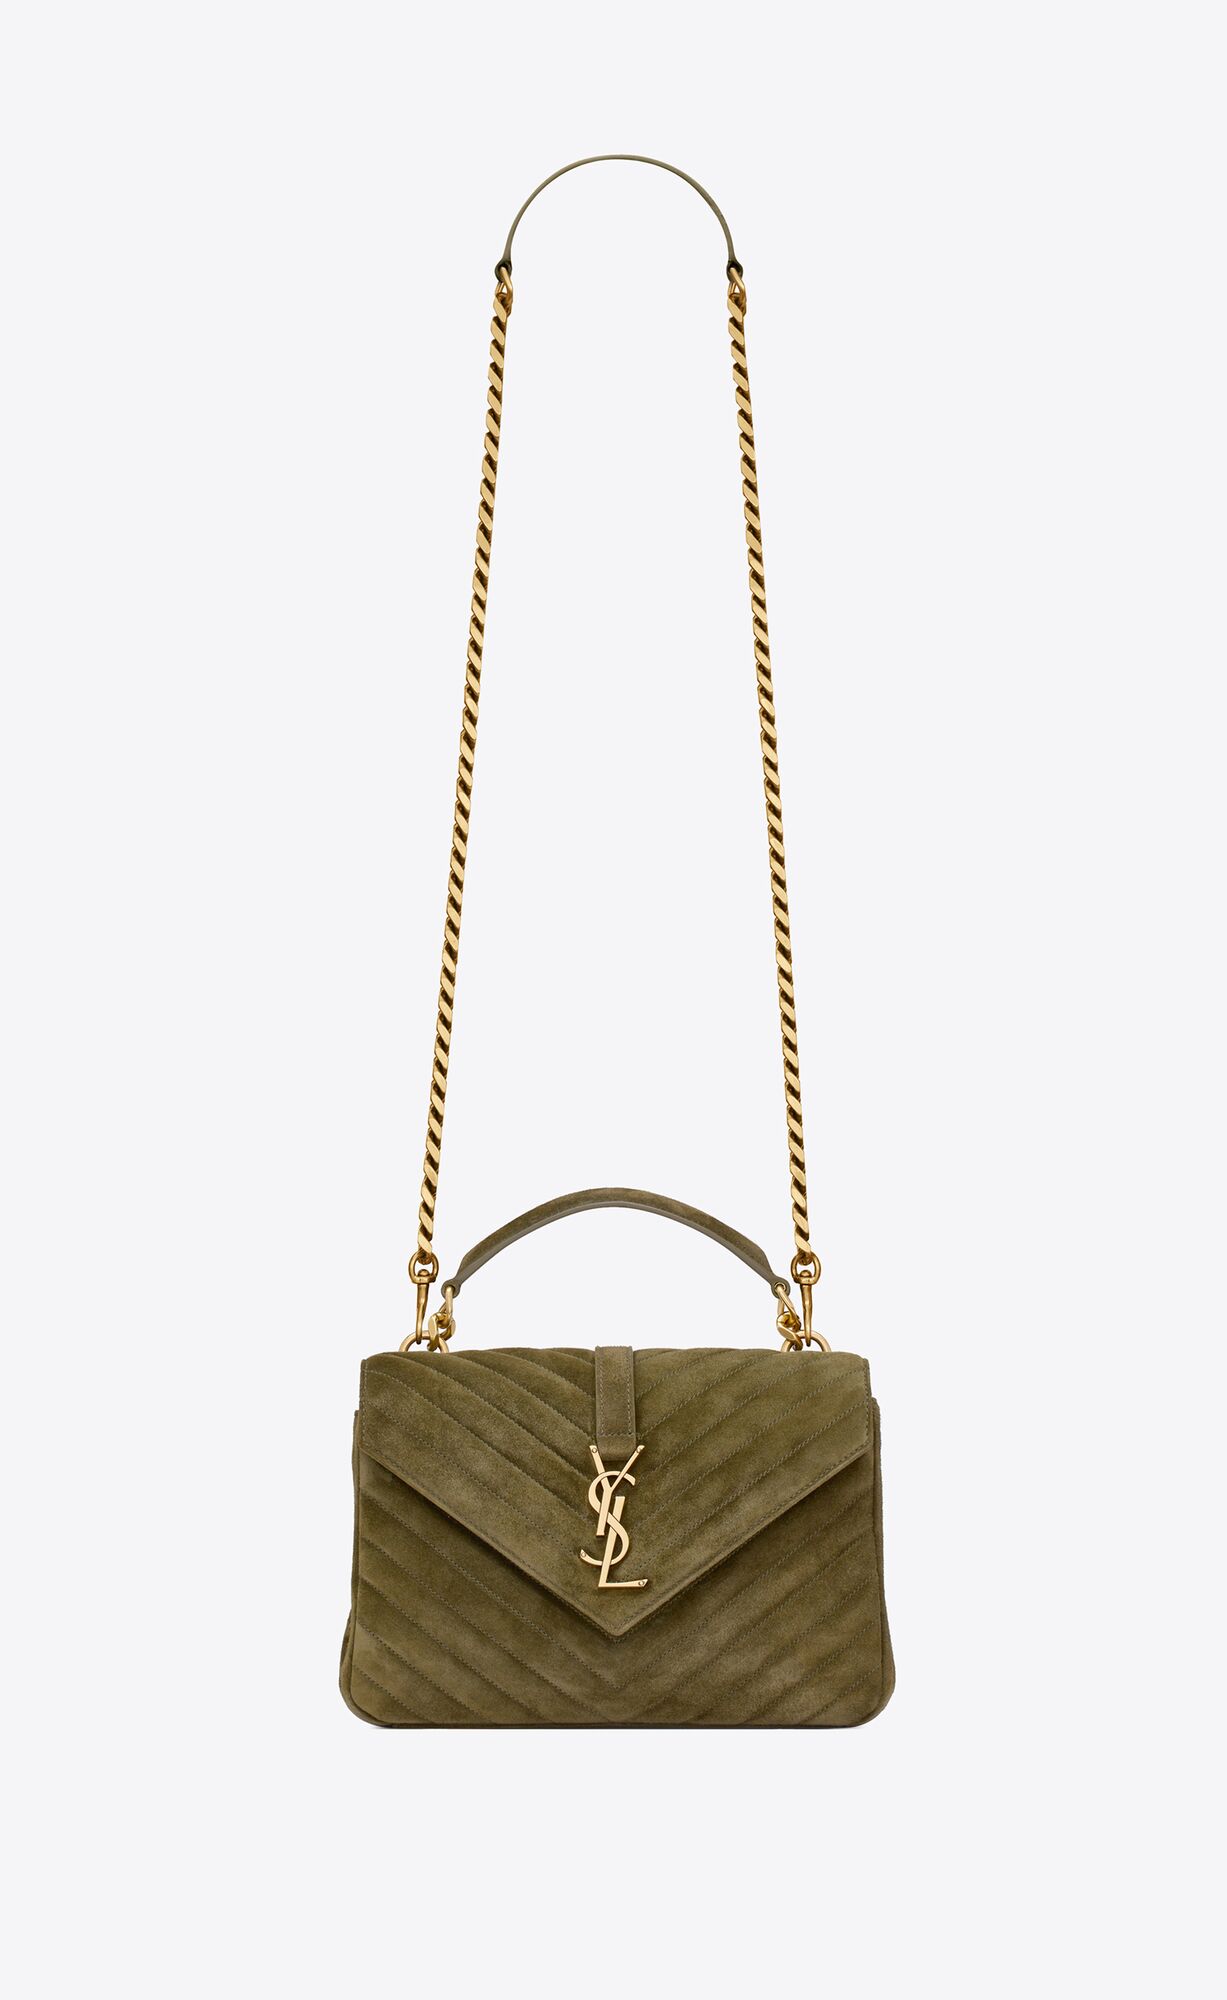 Saint Laurent Small Lou Suede Crossbody Bag in Loden Green